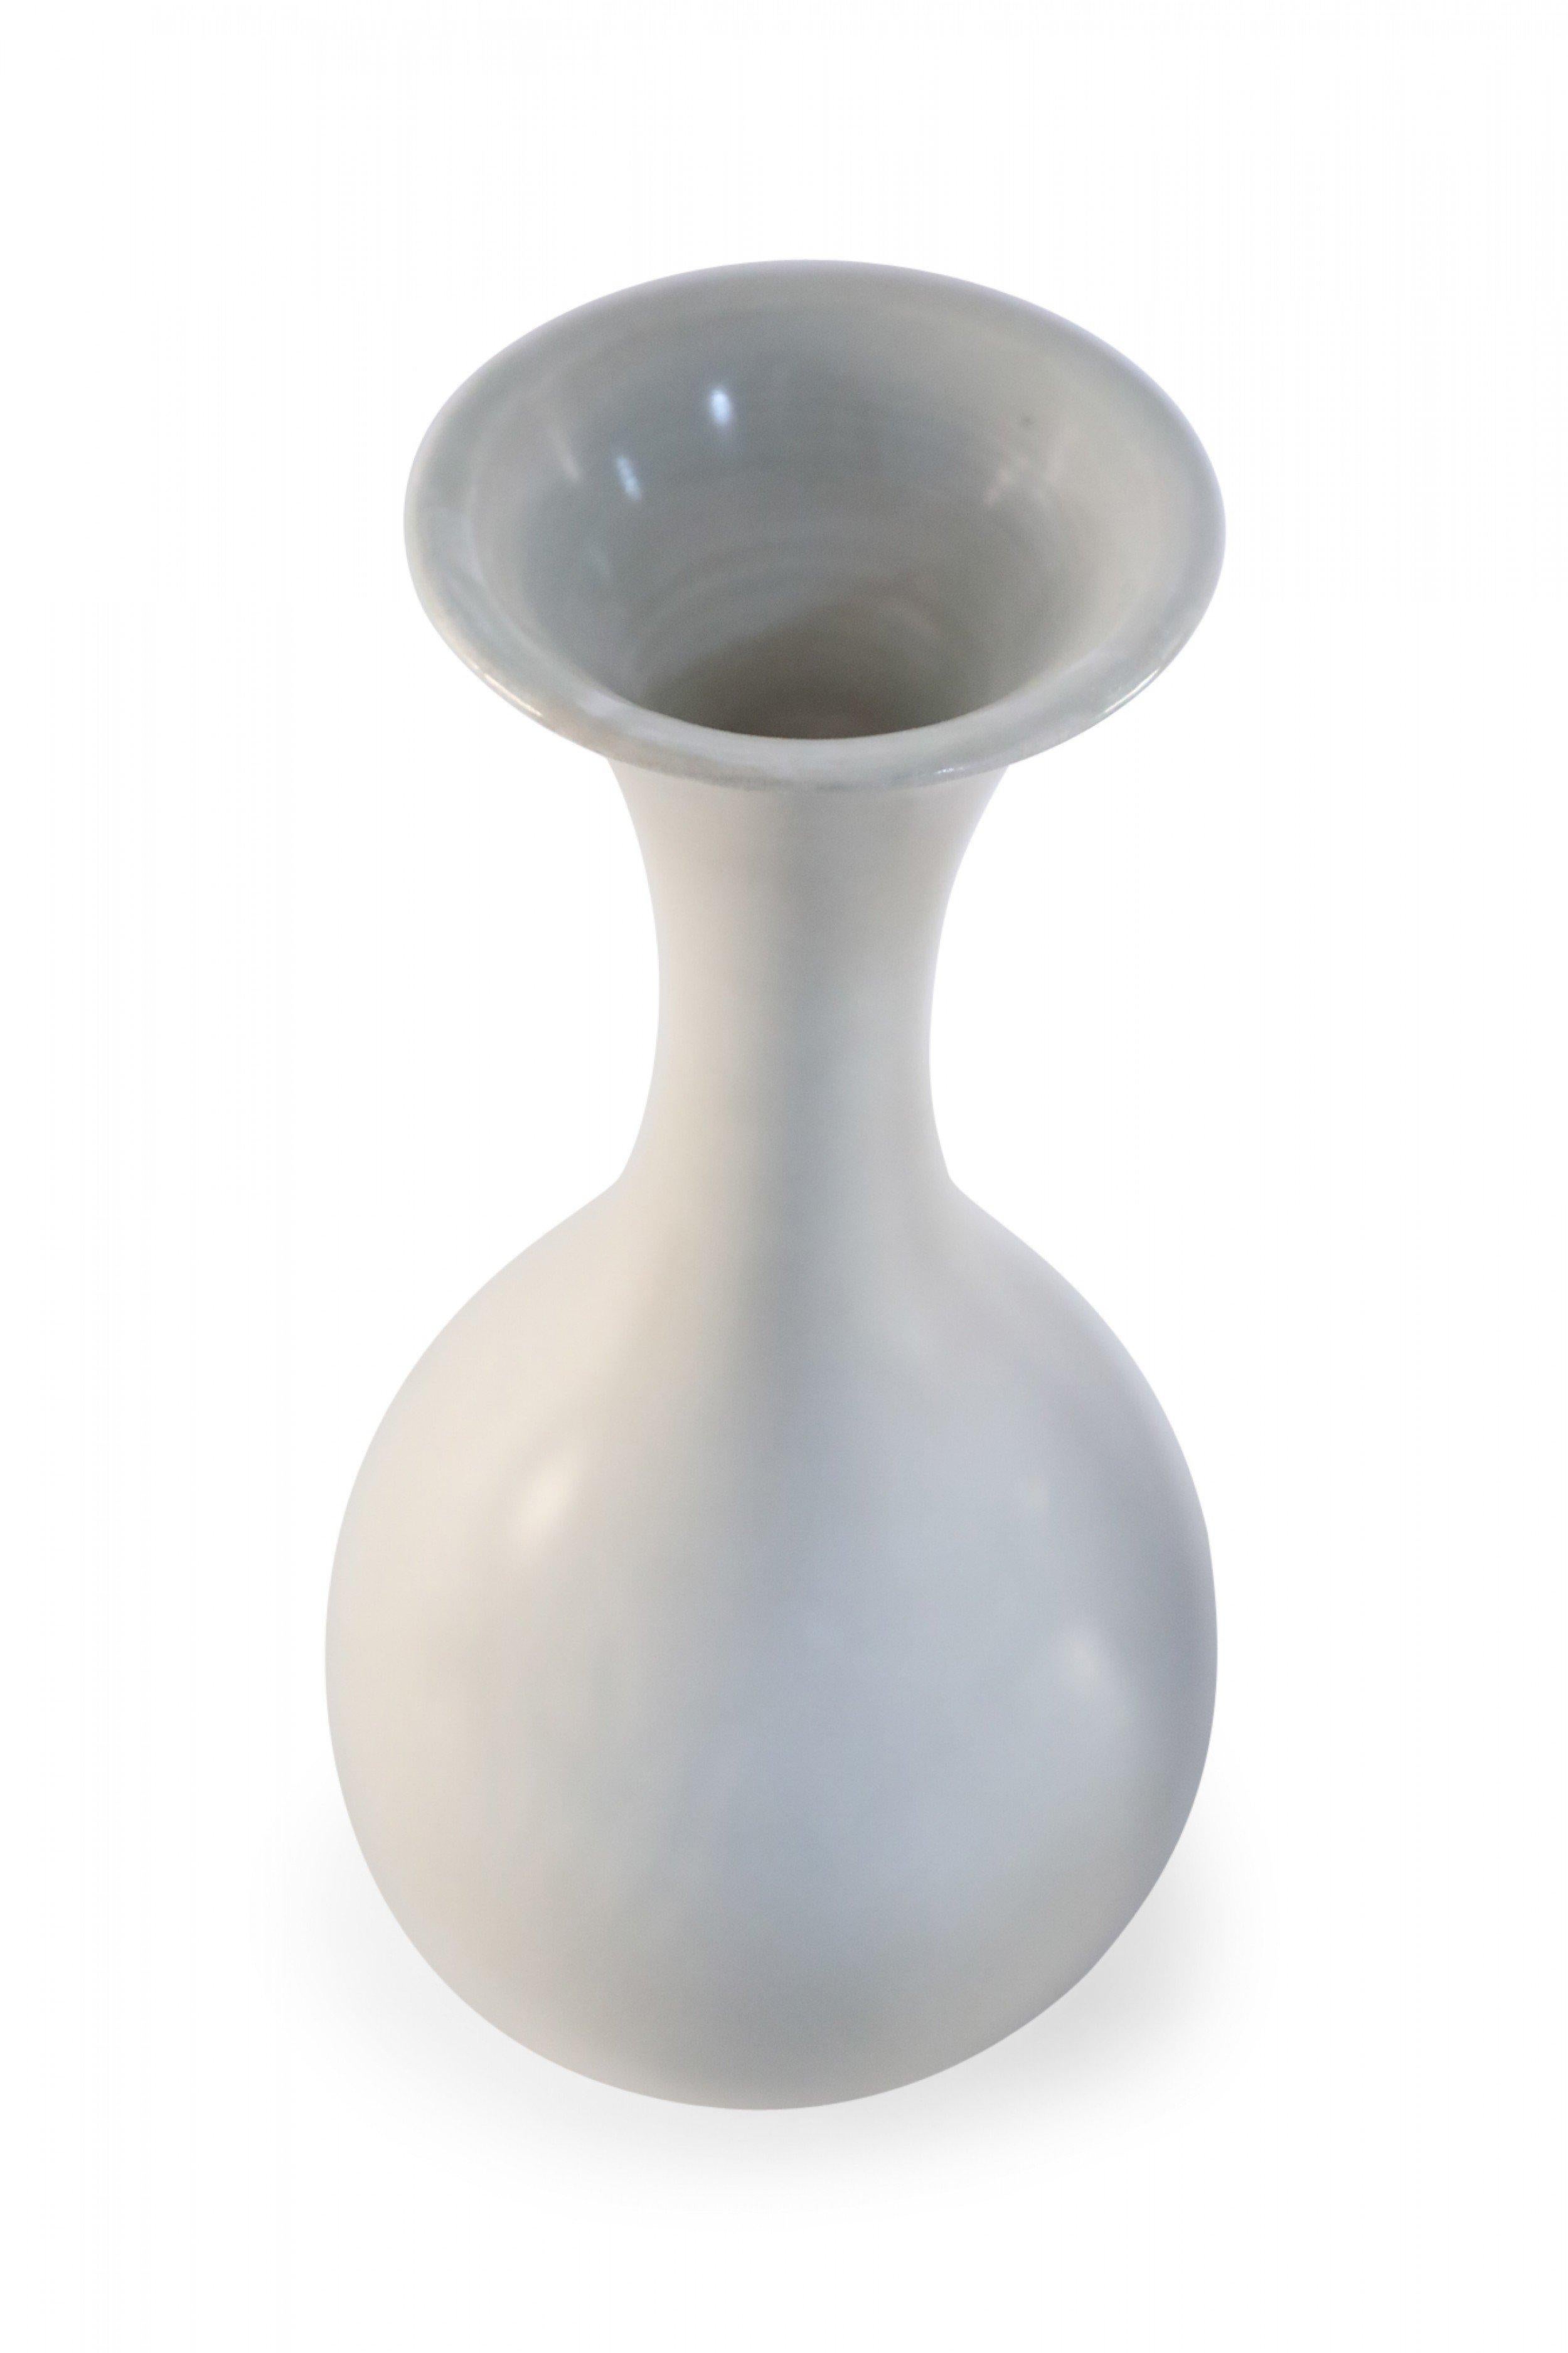 20th Century Chinese Off-White and Tonal Patterned Porcelain Vase For Sale